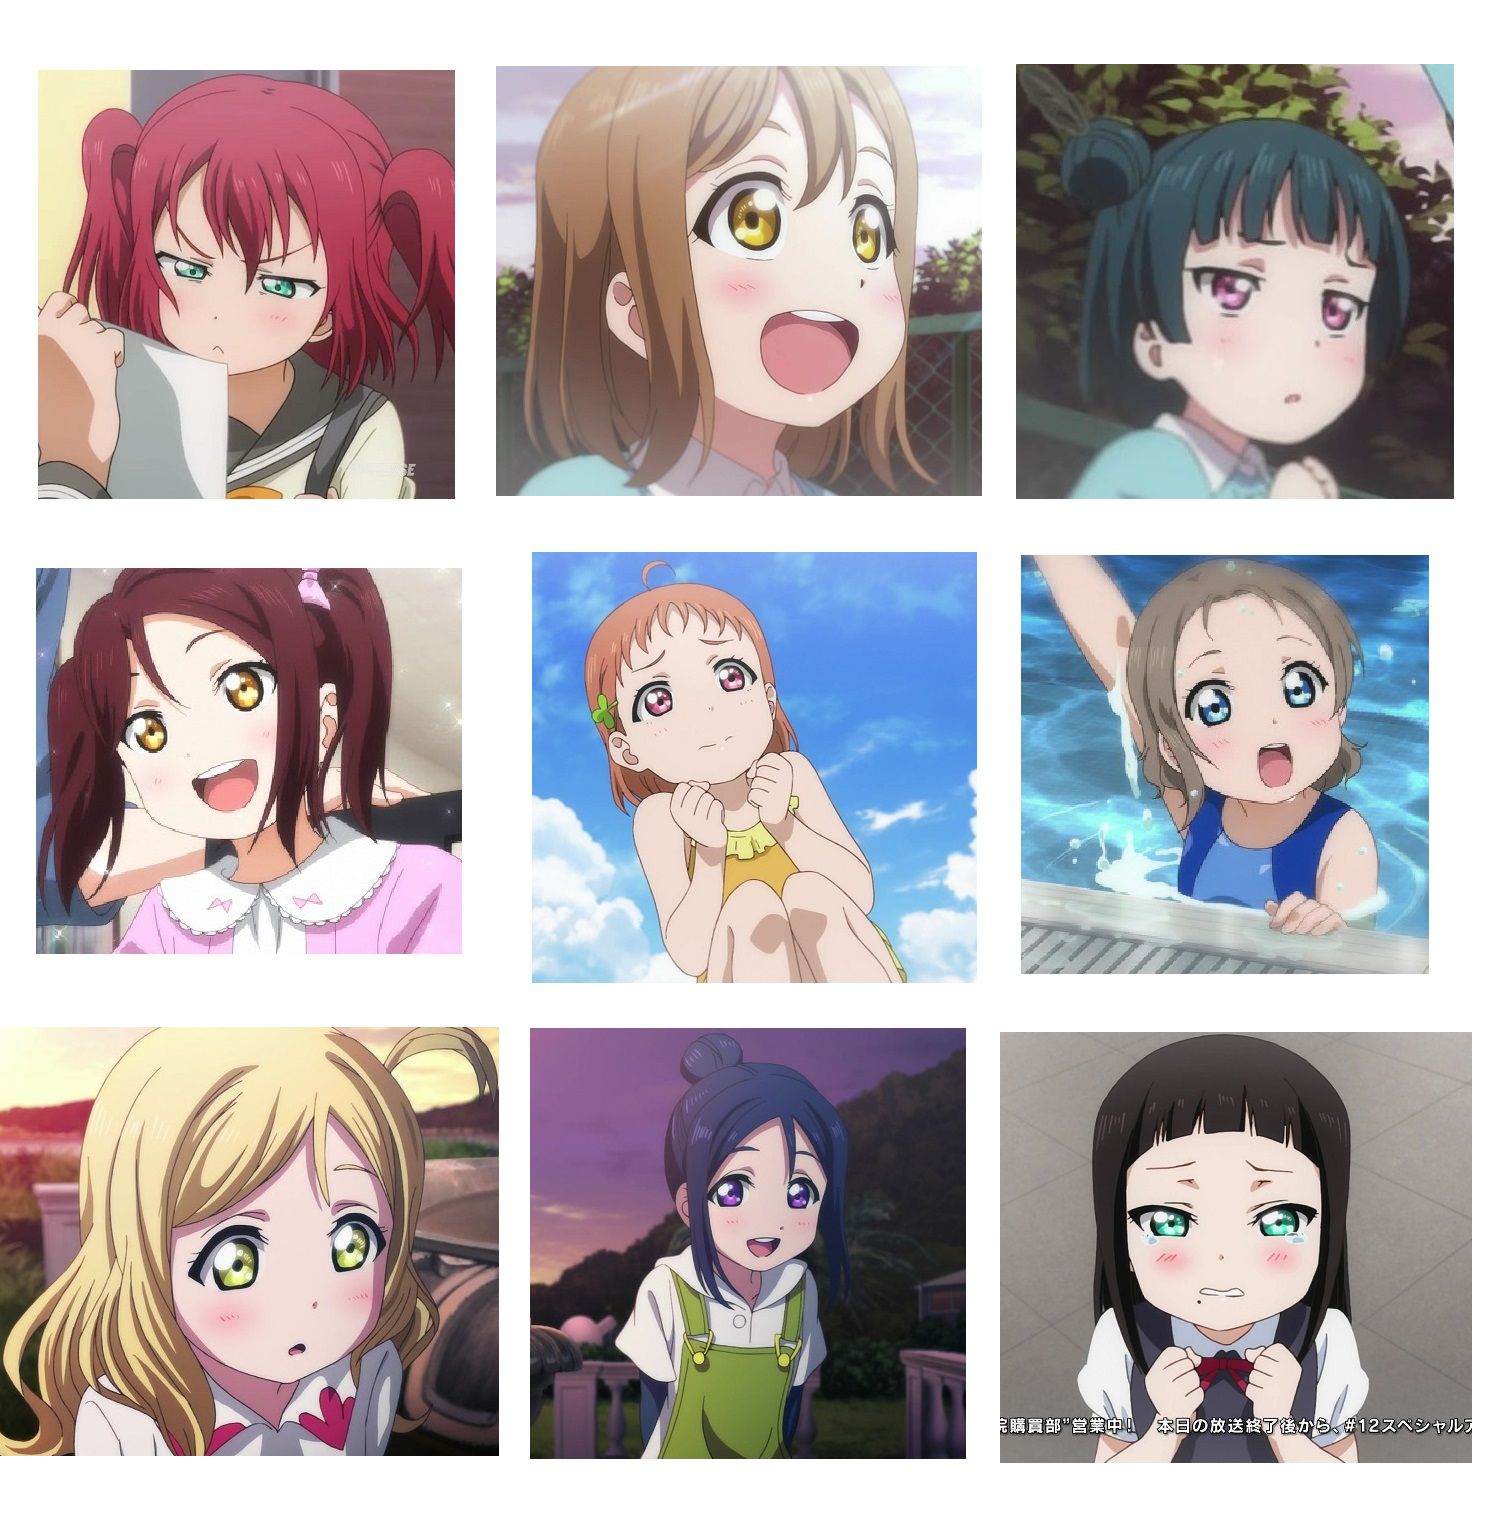 [God images] "love live! "If you see a loli age of members to be happy too, Lori live's tummy! And shout from wwwwww 18